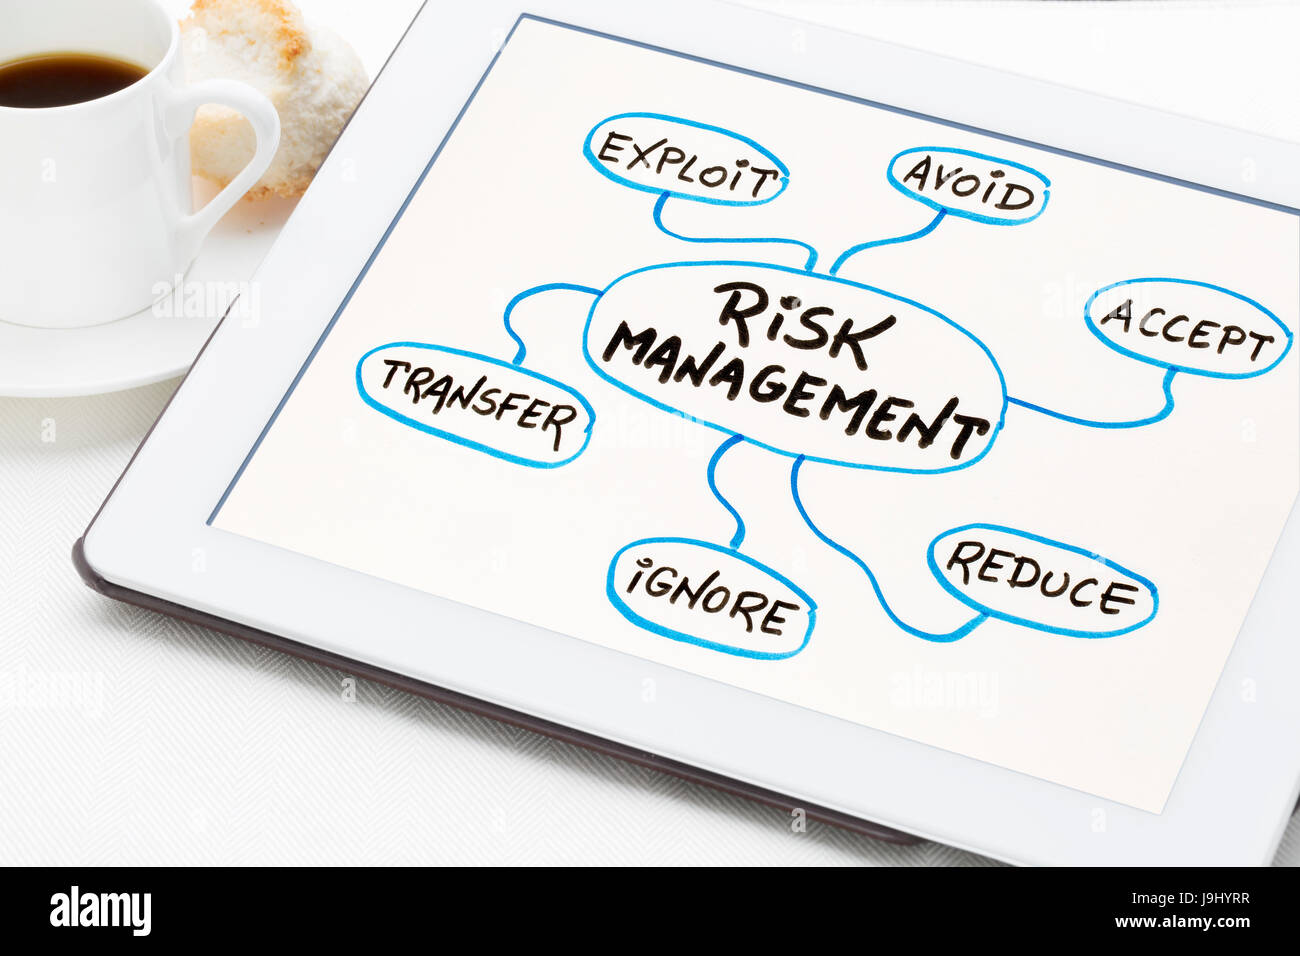 risk management flow chart or mind map - a sketch on a digital tablet with cup of espresso coffee Stock Photo